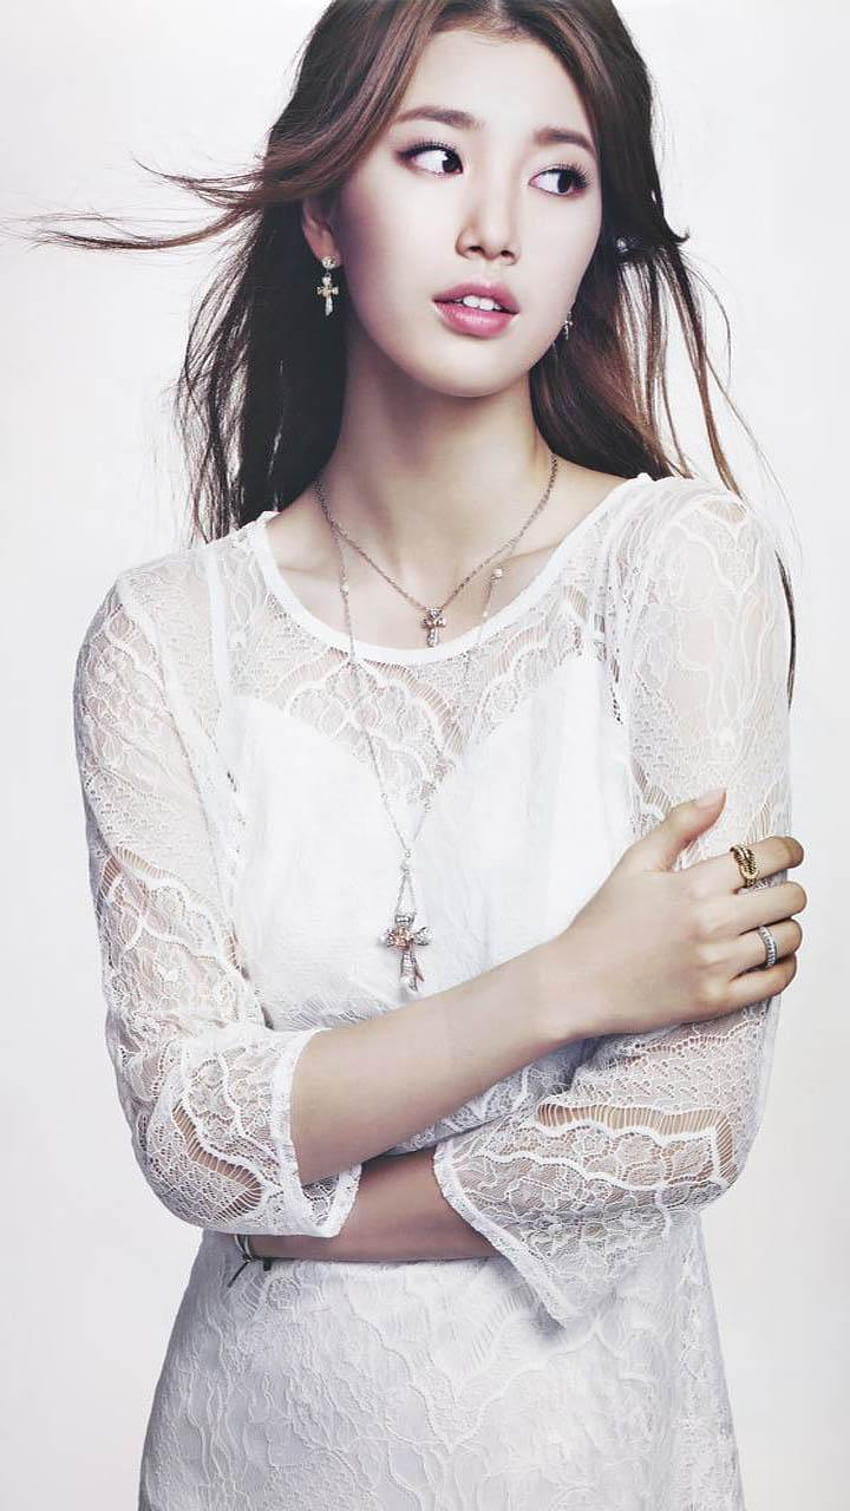 Bae Suzy for Android, suzy bae iphone HD phone wallpaper